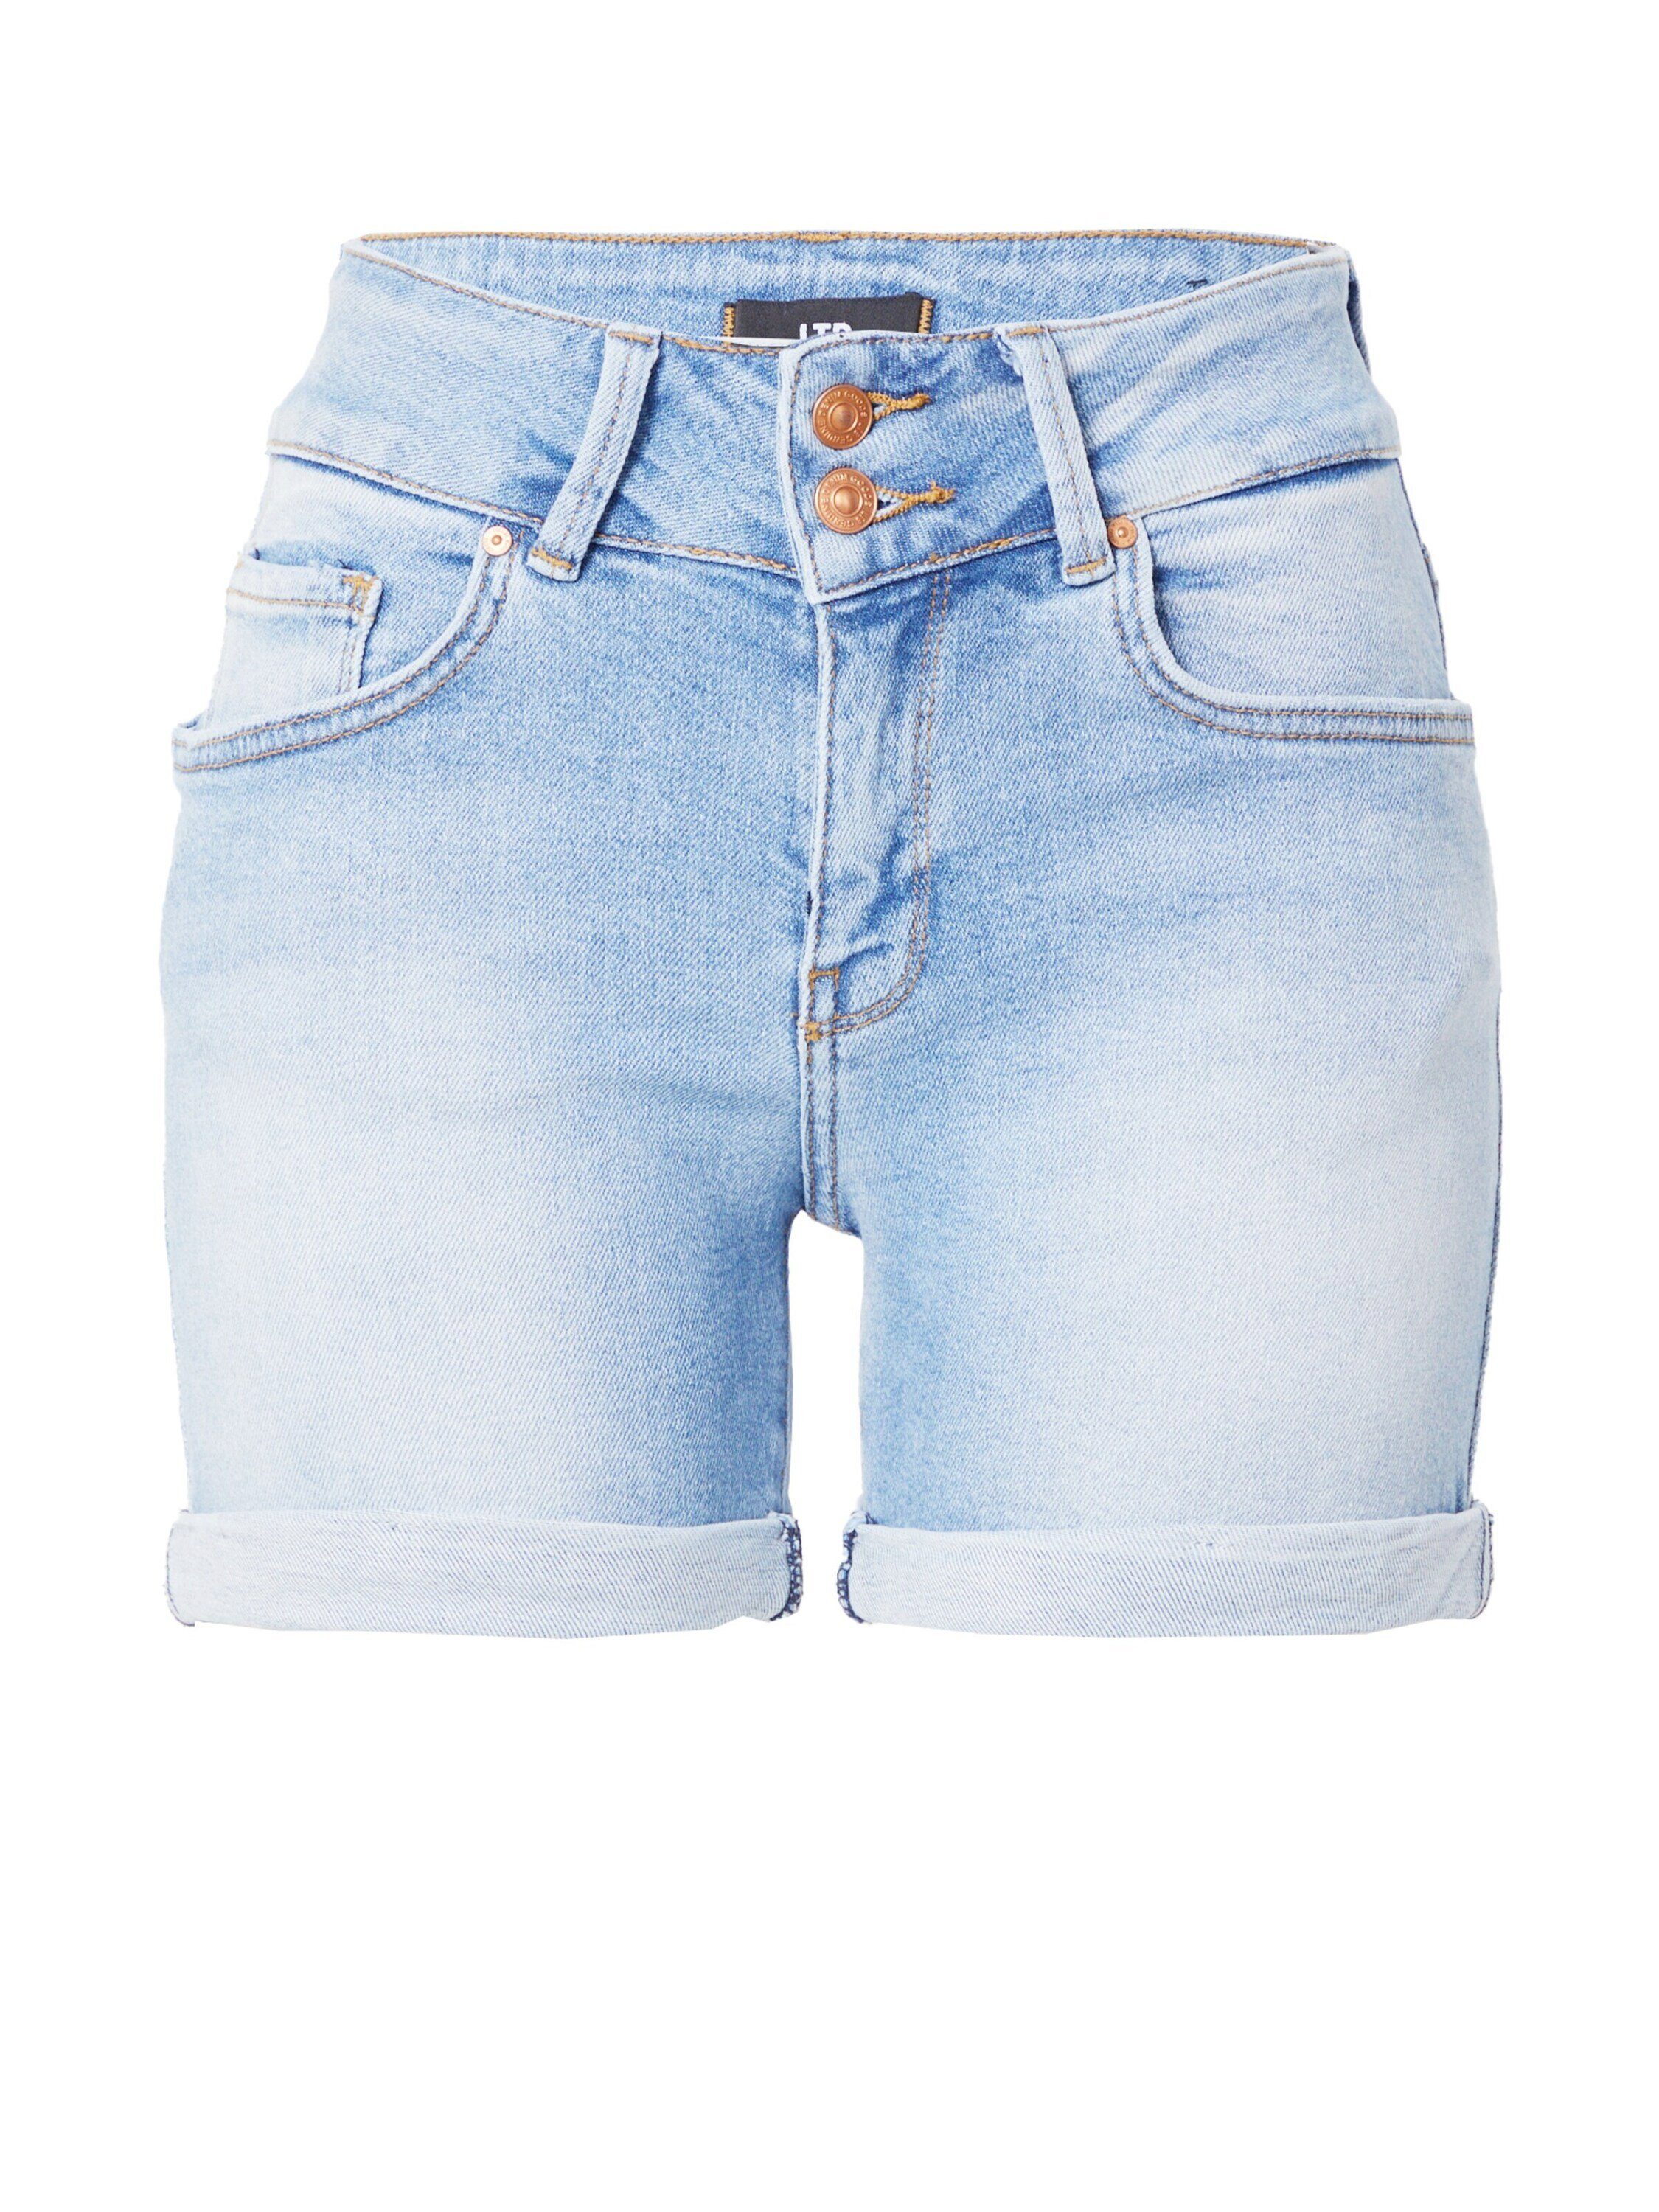 Weiteres (1-tlg) Details, Becky Jeansshorts LTB Plain/ohne Detail